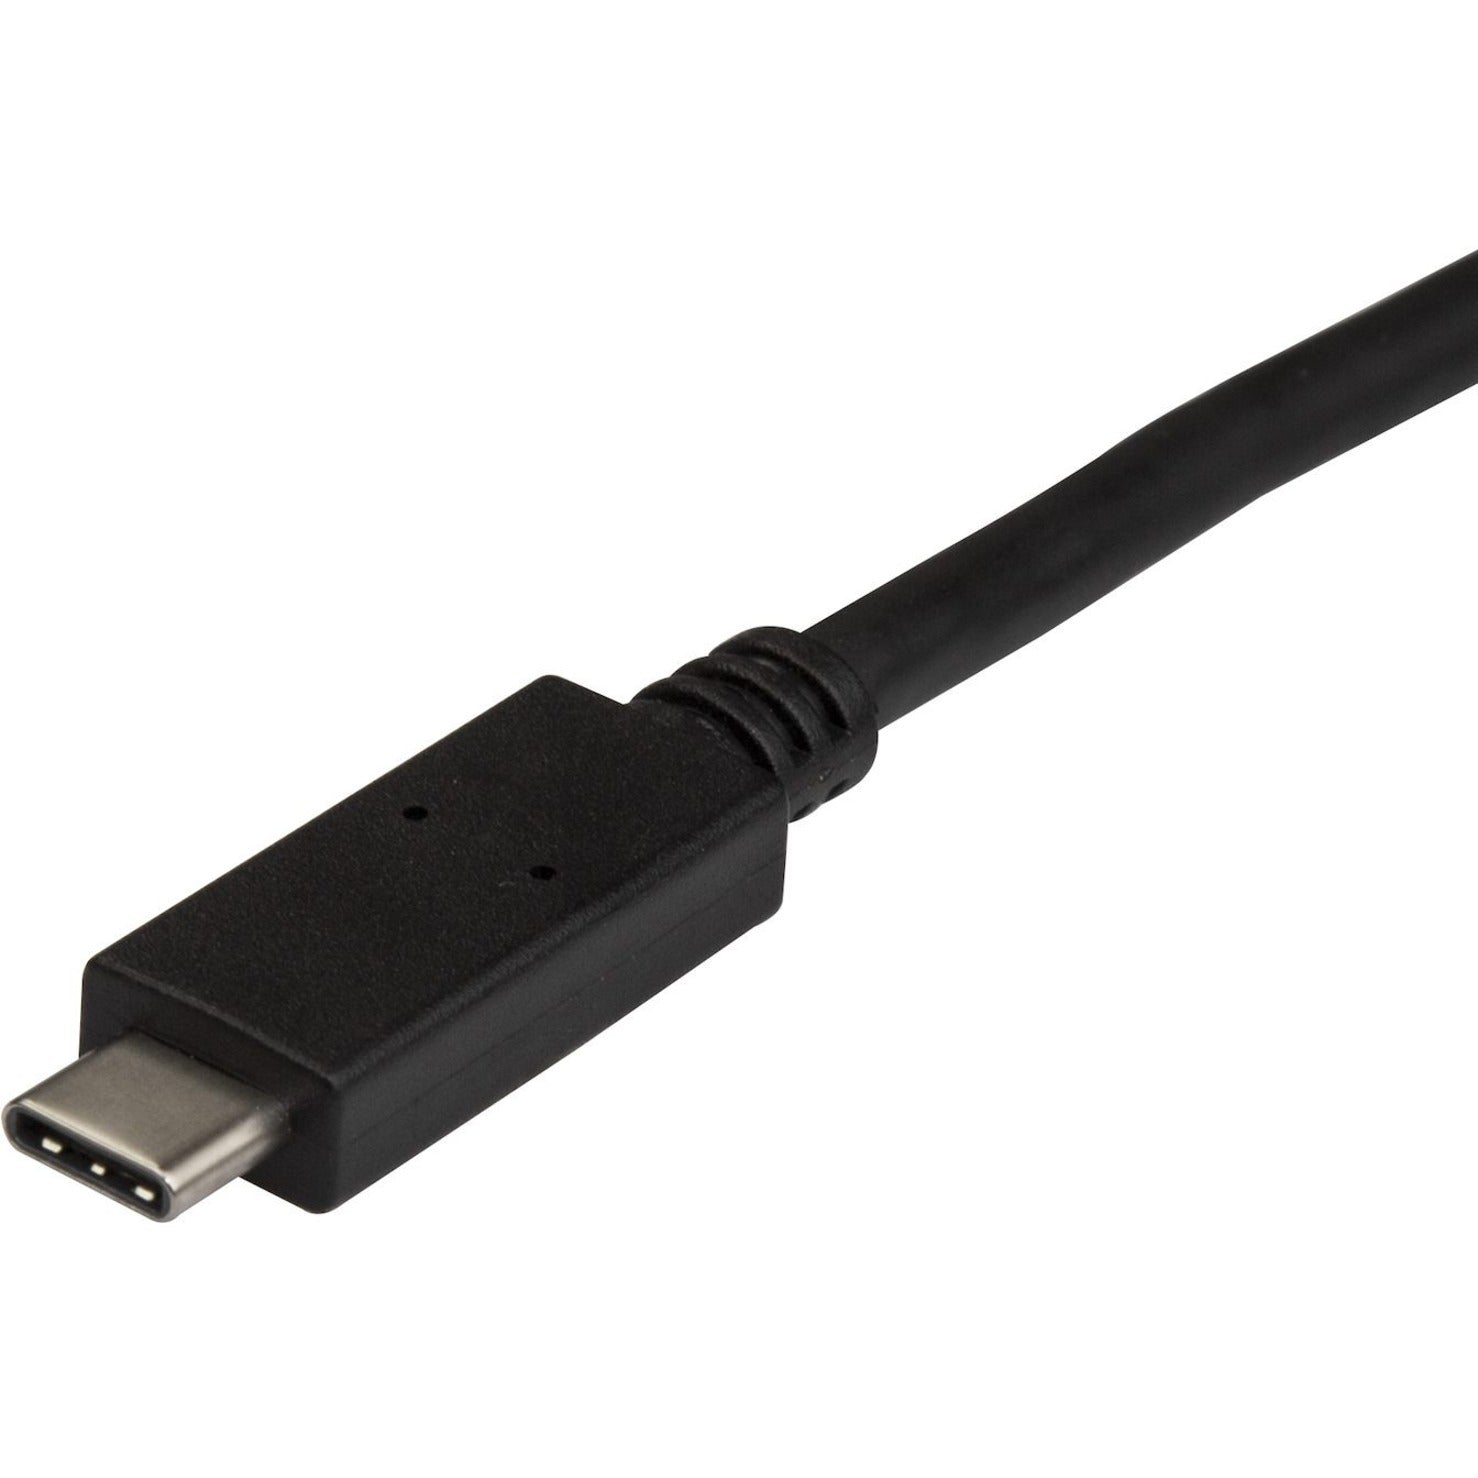 StarTech.com USB31AC50CM Sync/Charge USB Data Transfer Cable, 0.5m USB to USB C Cable - USB 3.1 (10Gbps)